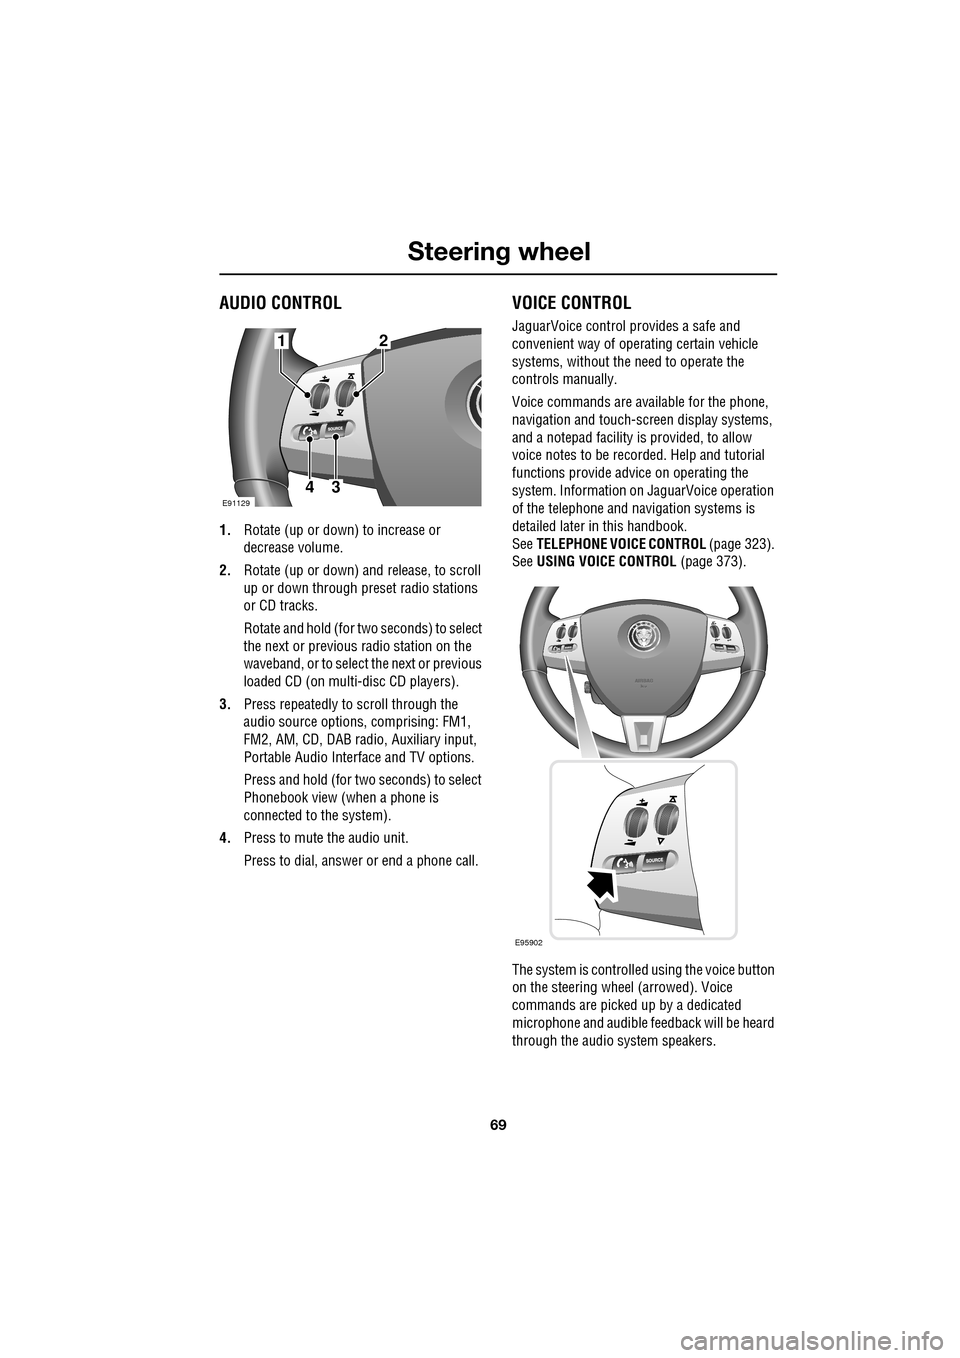 JAGUAR XF 2009 1.G Owners Manual 69
Steering wheel
               
AUDIO CONTROL
1.Rotate (up or down) to increase or 
decrease volume.
2. Rotate (up or down) a nd release, to scroll 
up or down through preset radio stations 
or CD t